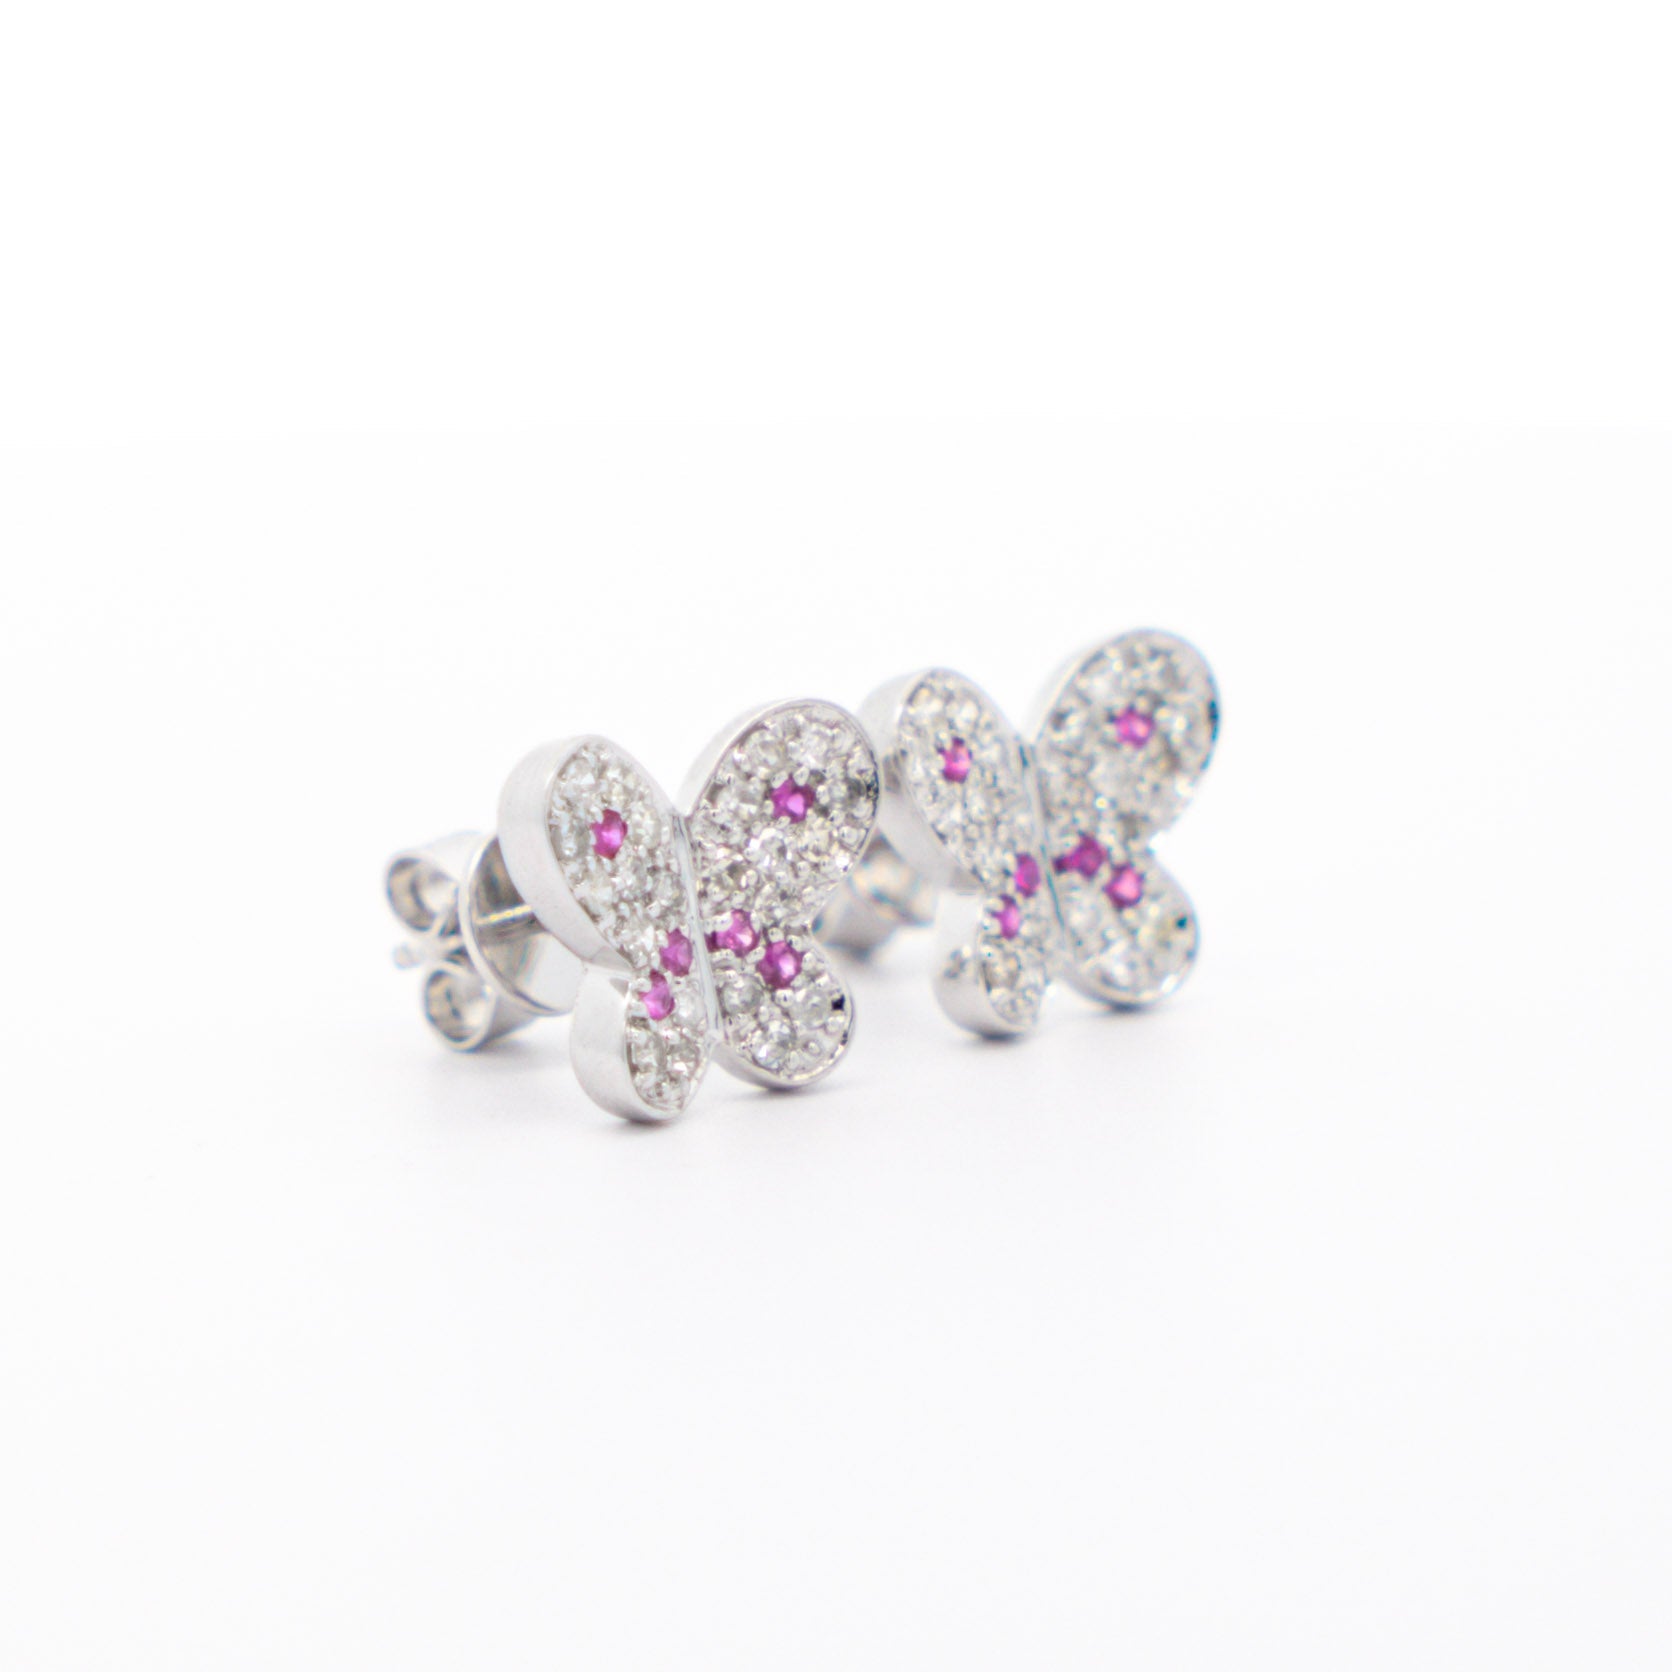 Natural-Diamond-and-Pink-Sapphire-Cluster-Butterfly-Stud-Earrings-in-14K-White-Gold-Earrings-2.jpg